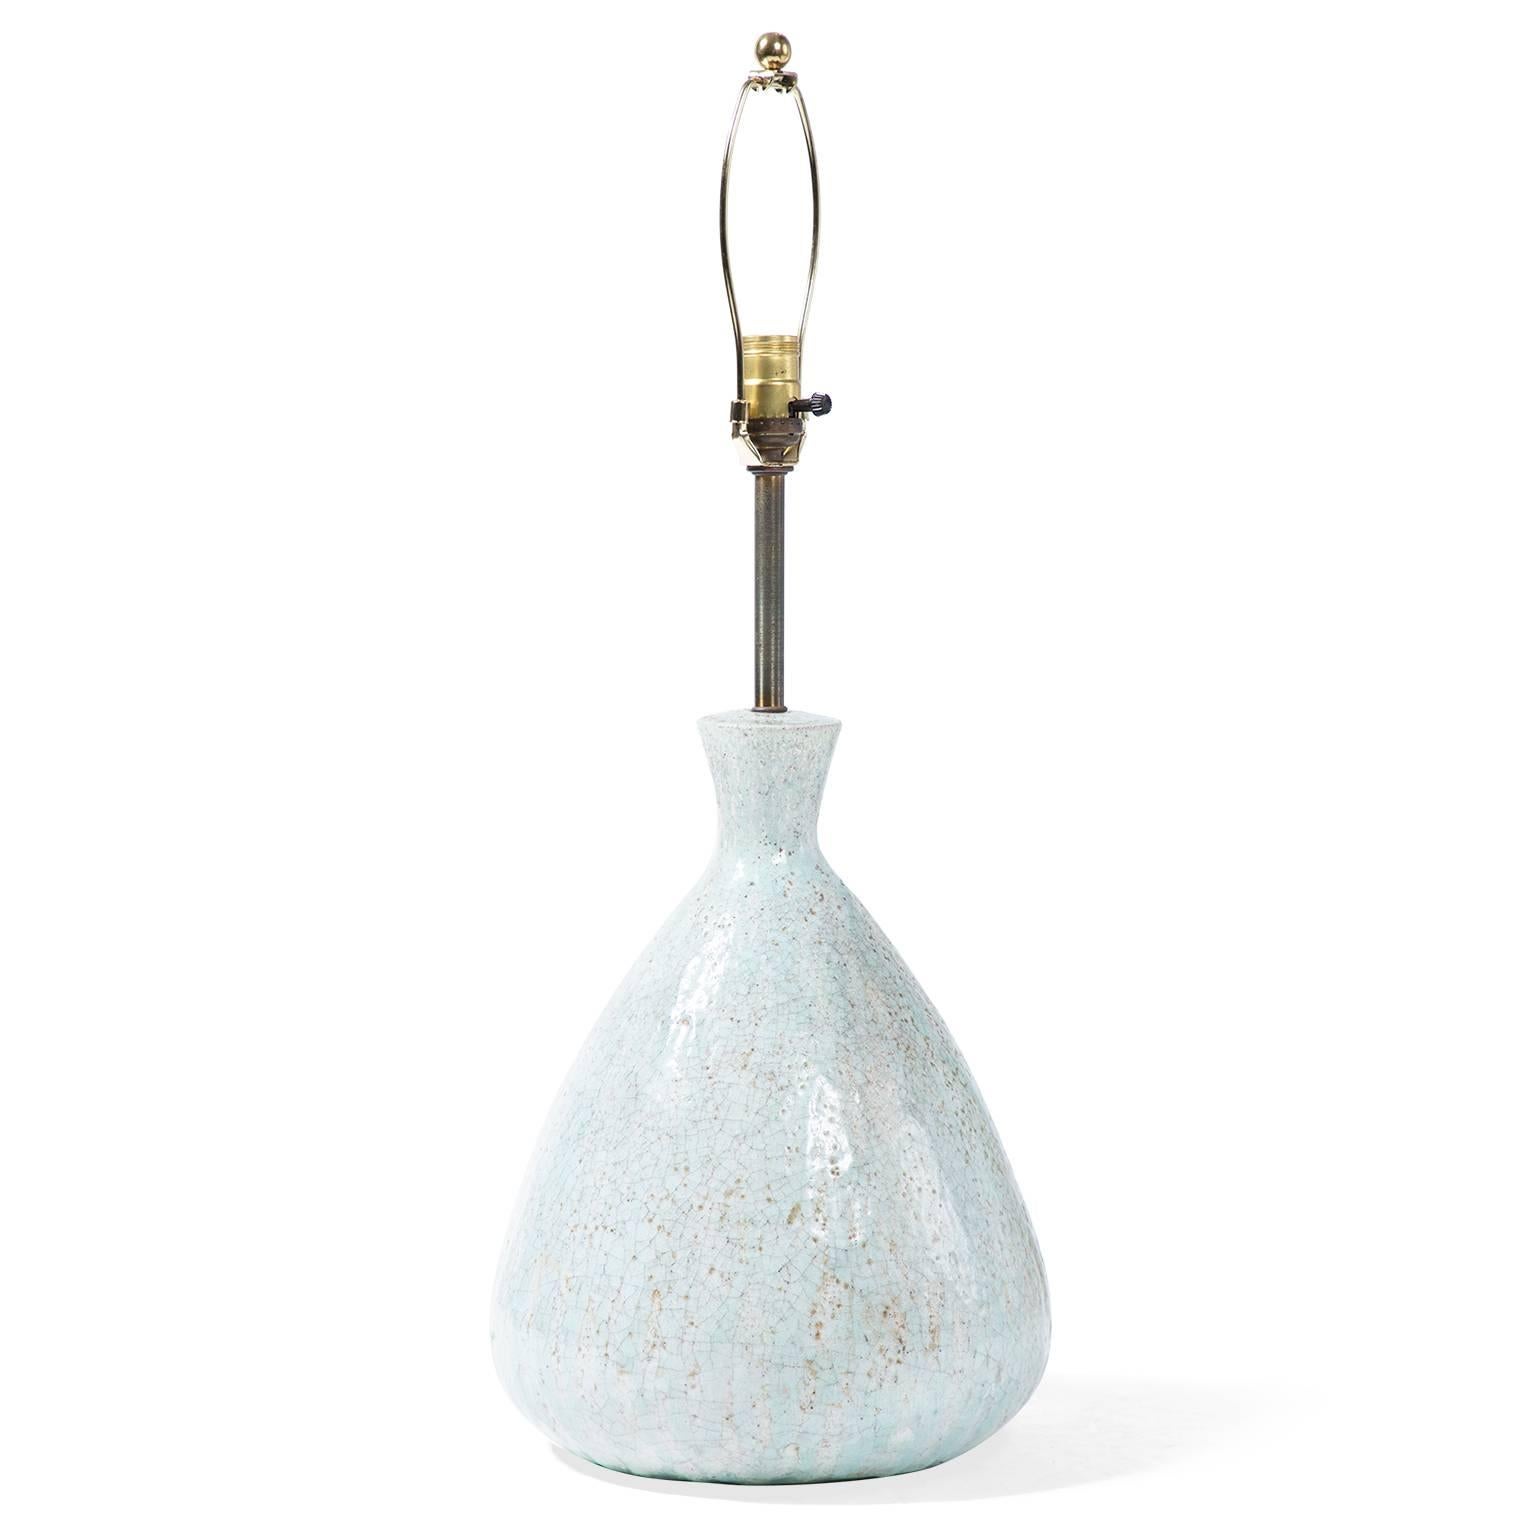 In a classic teardrop shape, this mid-century lamp combines a ceramic base with a metal armature. A reactive glaze alternates between pale blue and beige and creates a crackled, textural surface. In excellent working condition, the lamp includes a